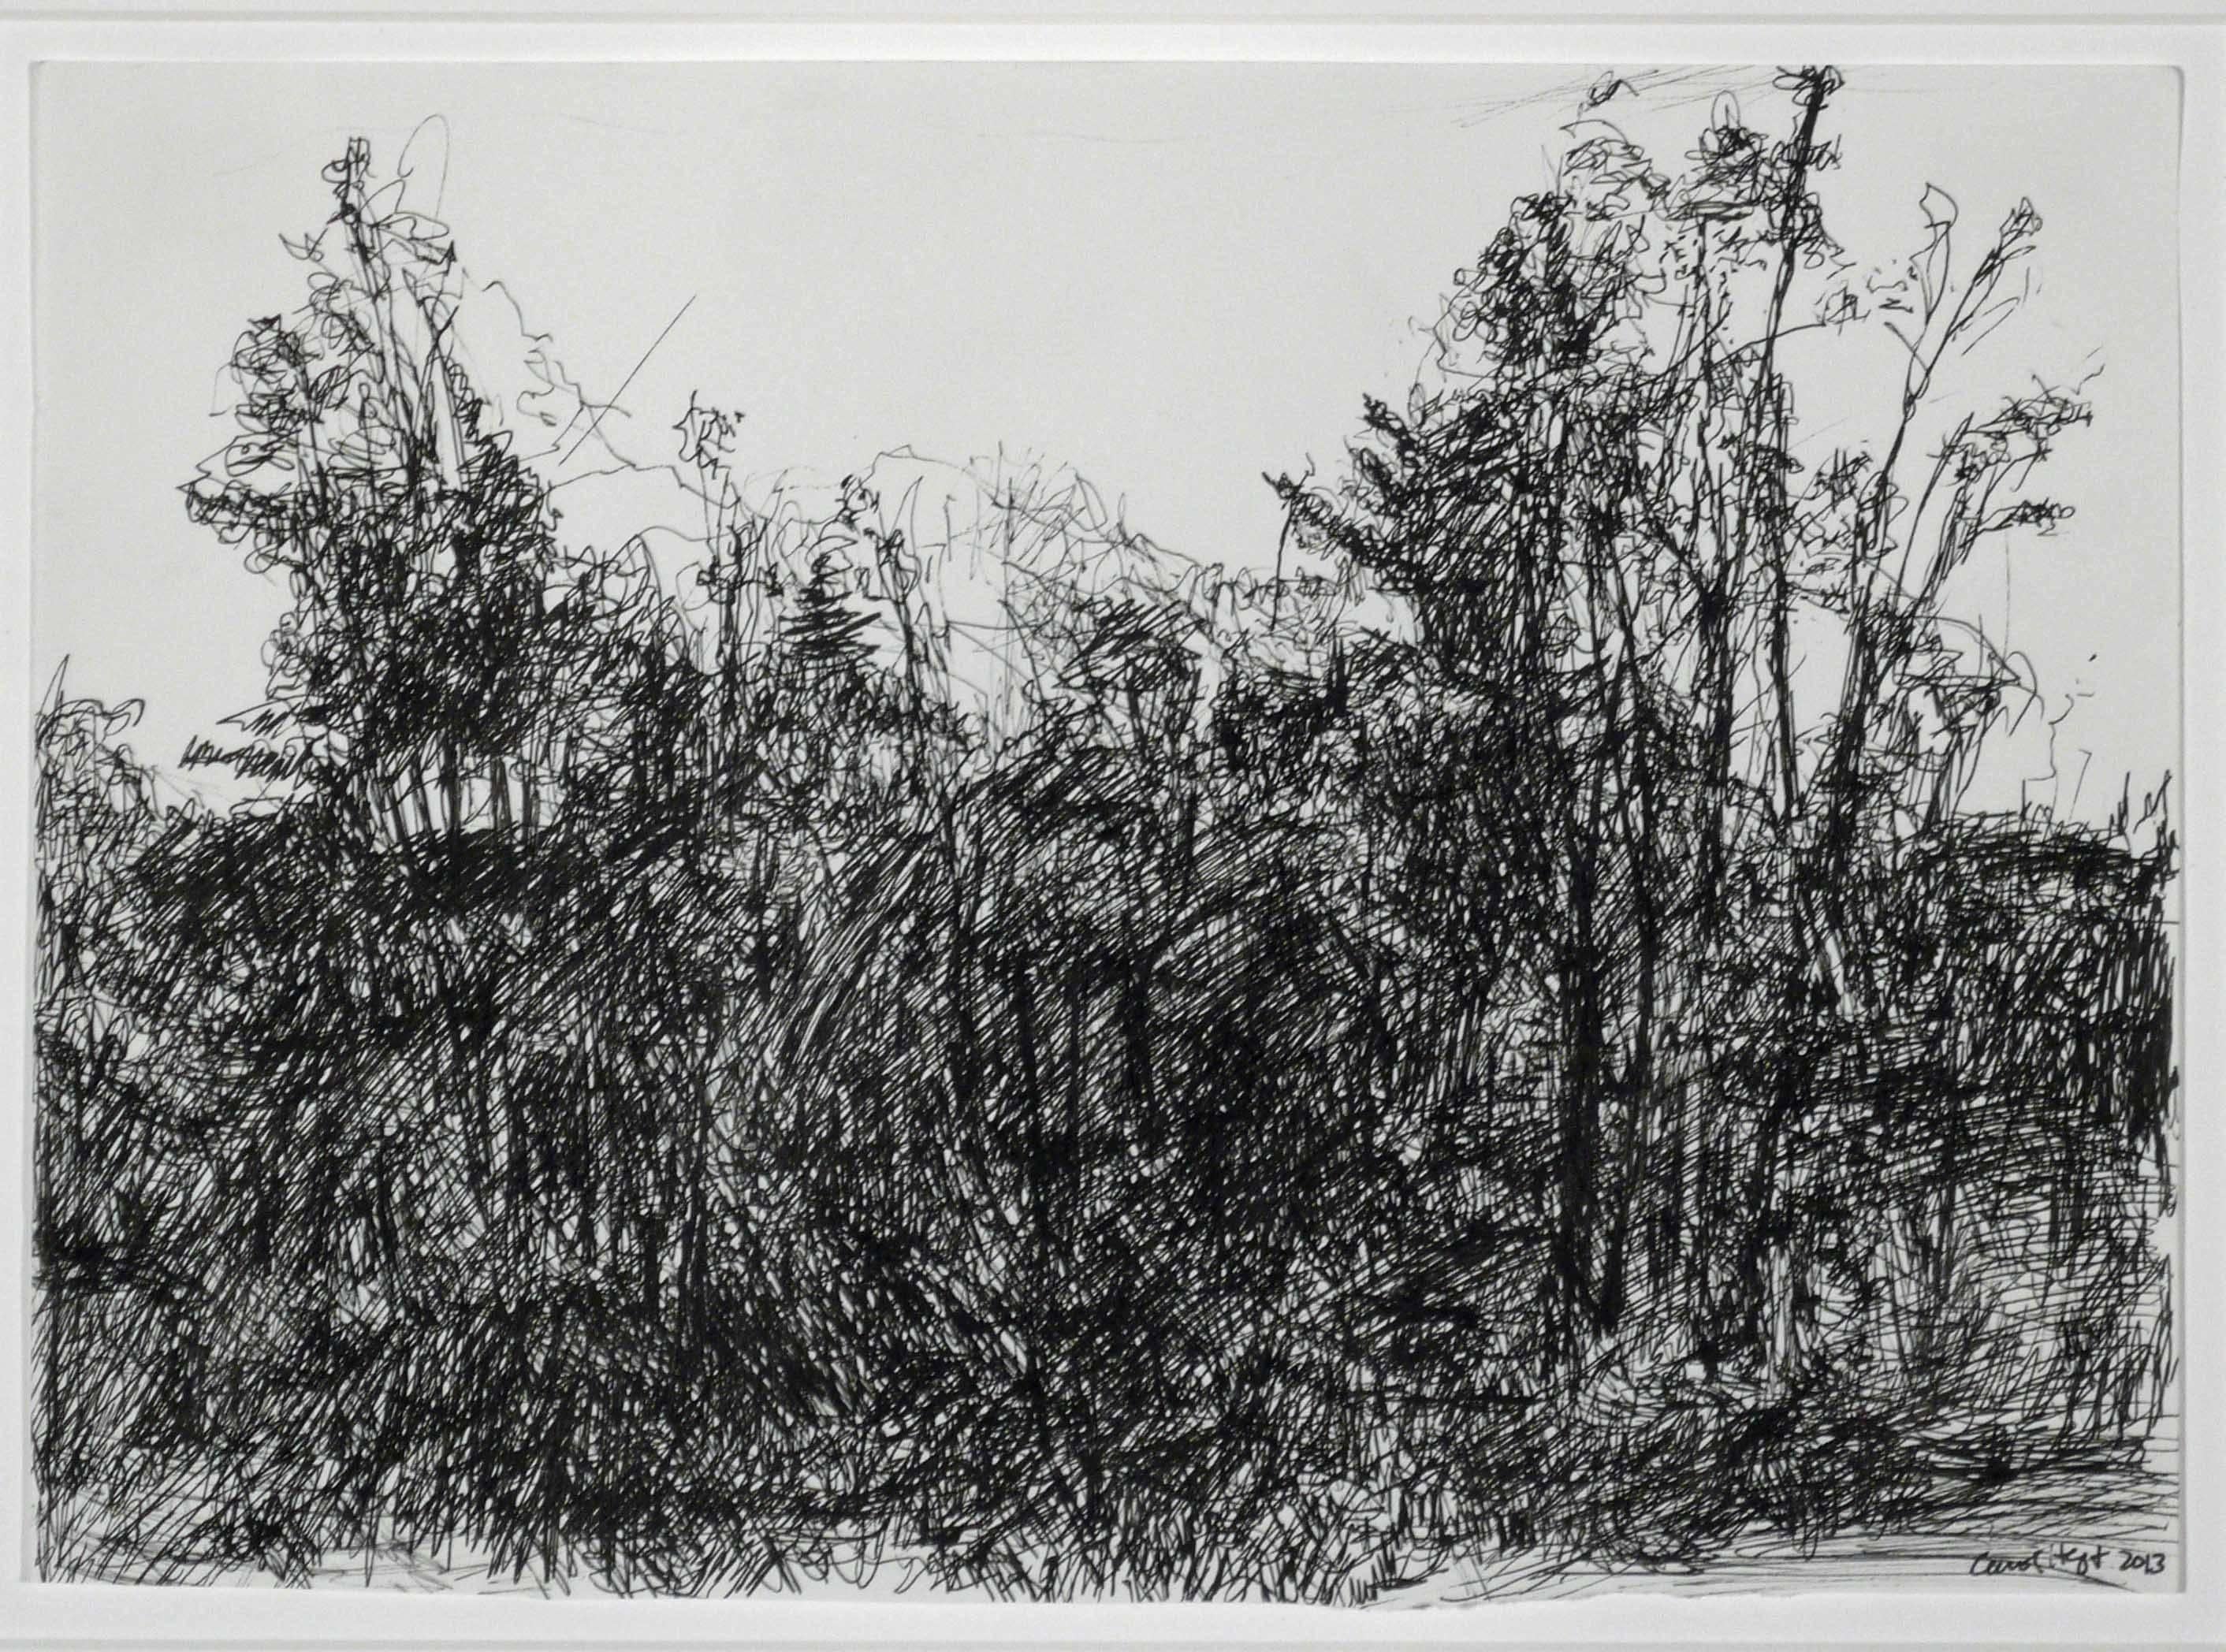 LANDSCAPES FROM THE BUS - Gray Landscape Art by Carol Heft